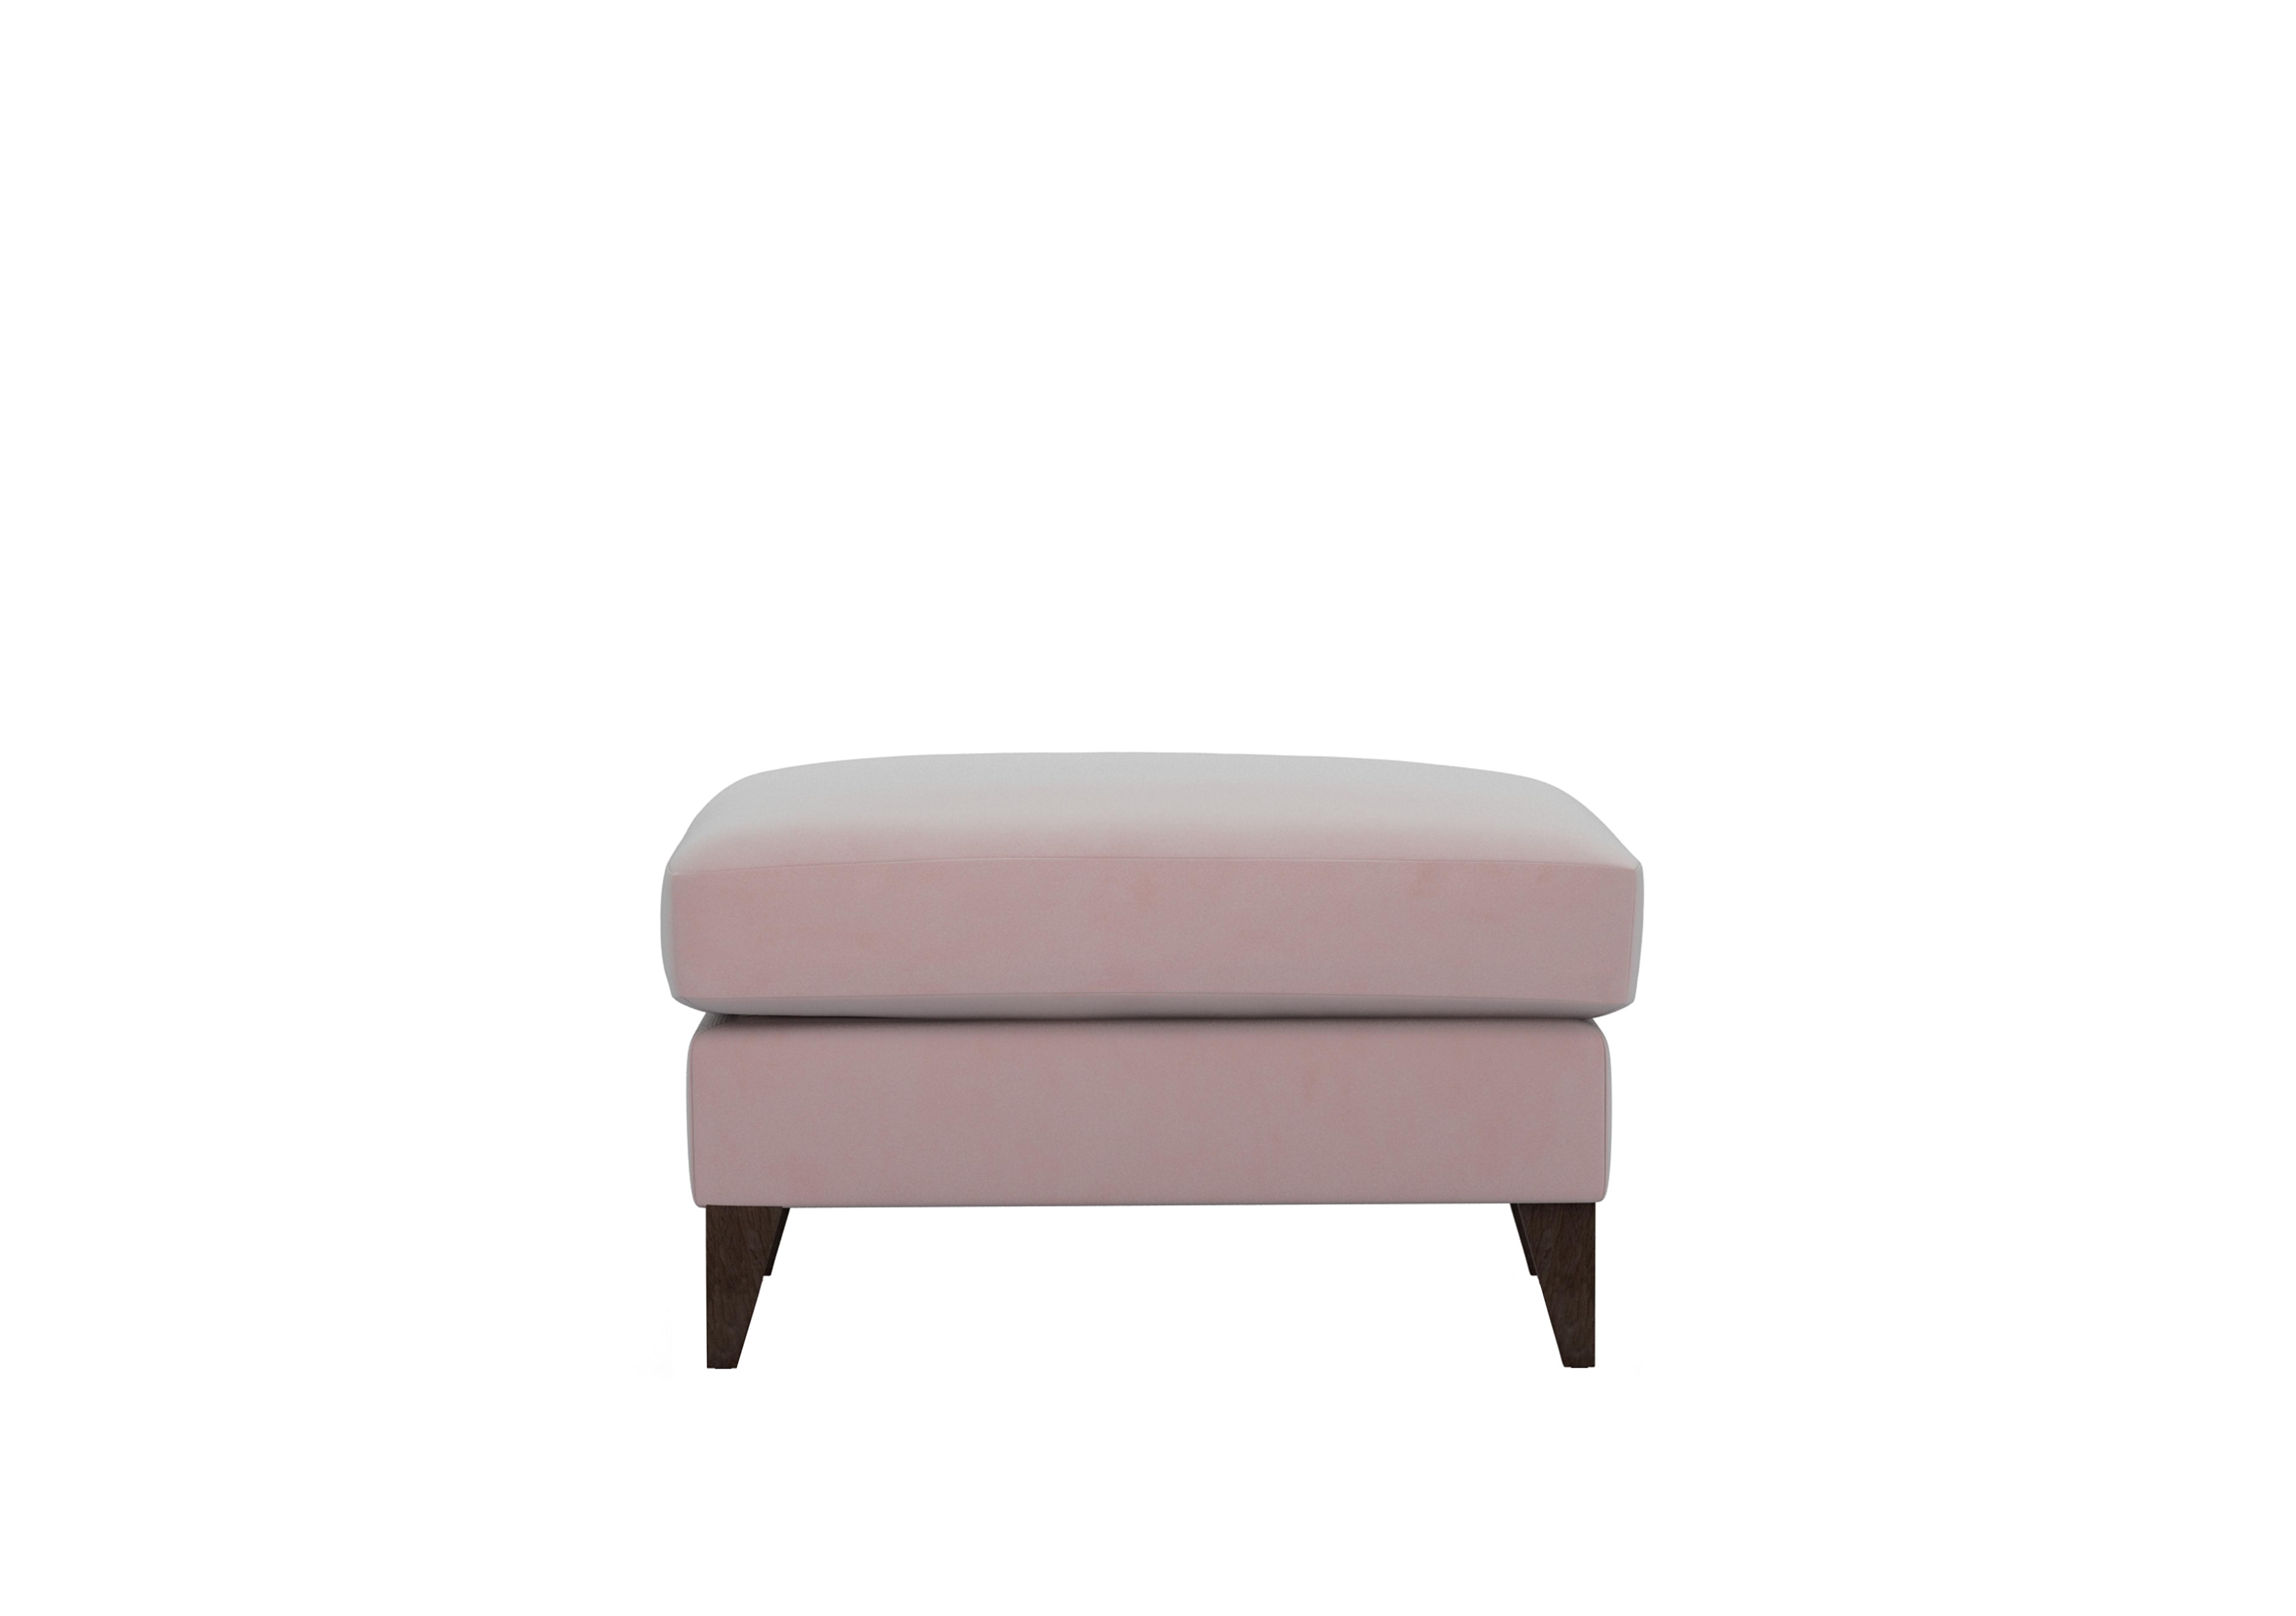 Romilly Fabric Footstool in Cot256 Cotton Candy Wa Ft on Furniture Village